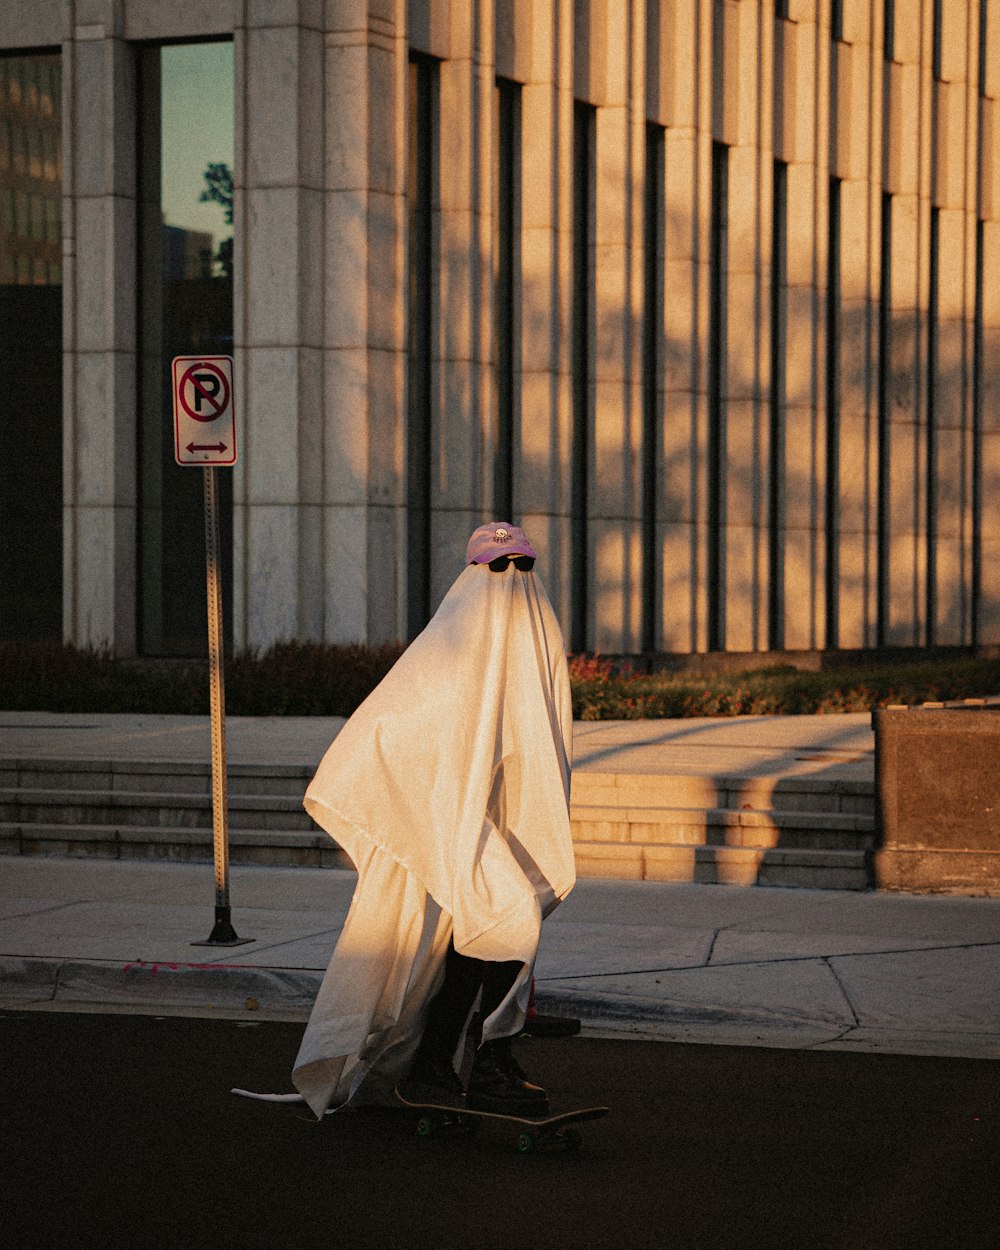 a person on a skateboard wrapped in a sheet